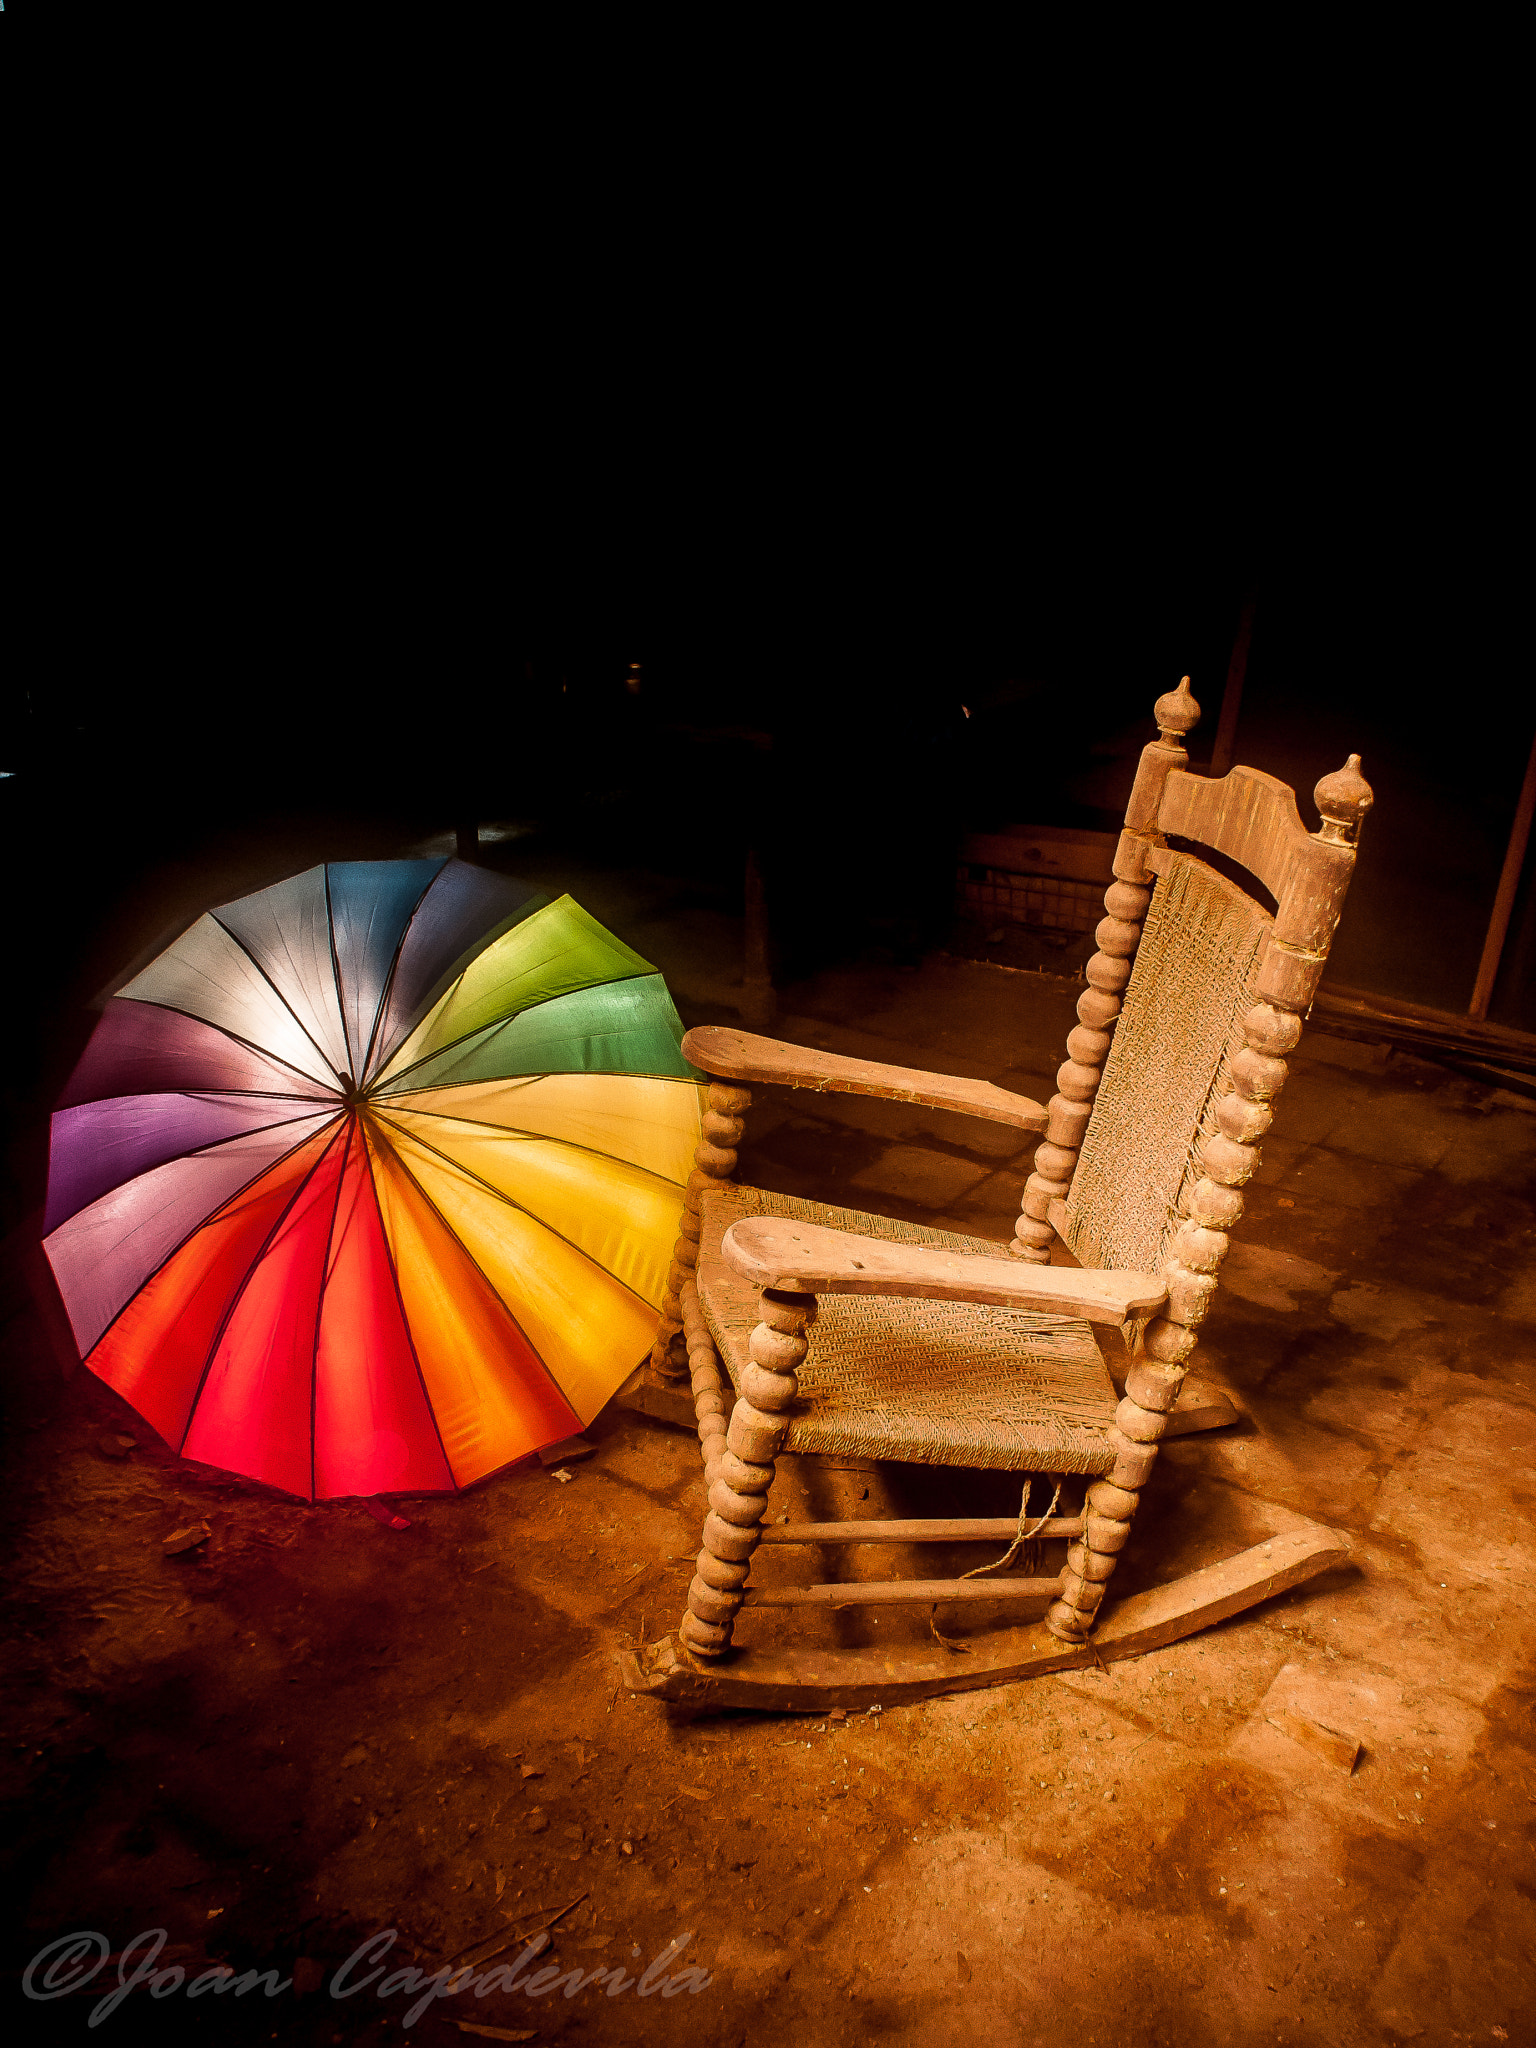 Sigma 14mm F3.5 sample photo. The old rocking chair and a psychedelic umbrella photography